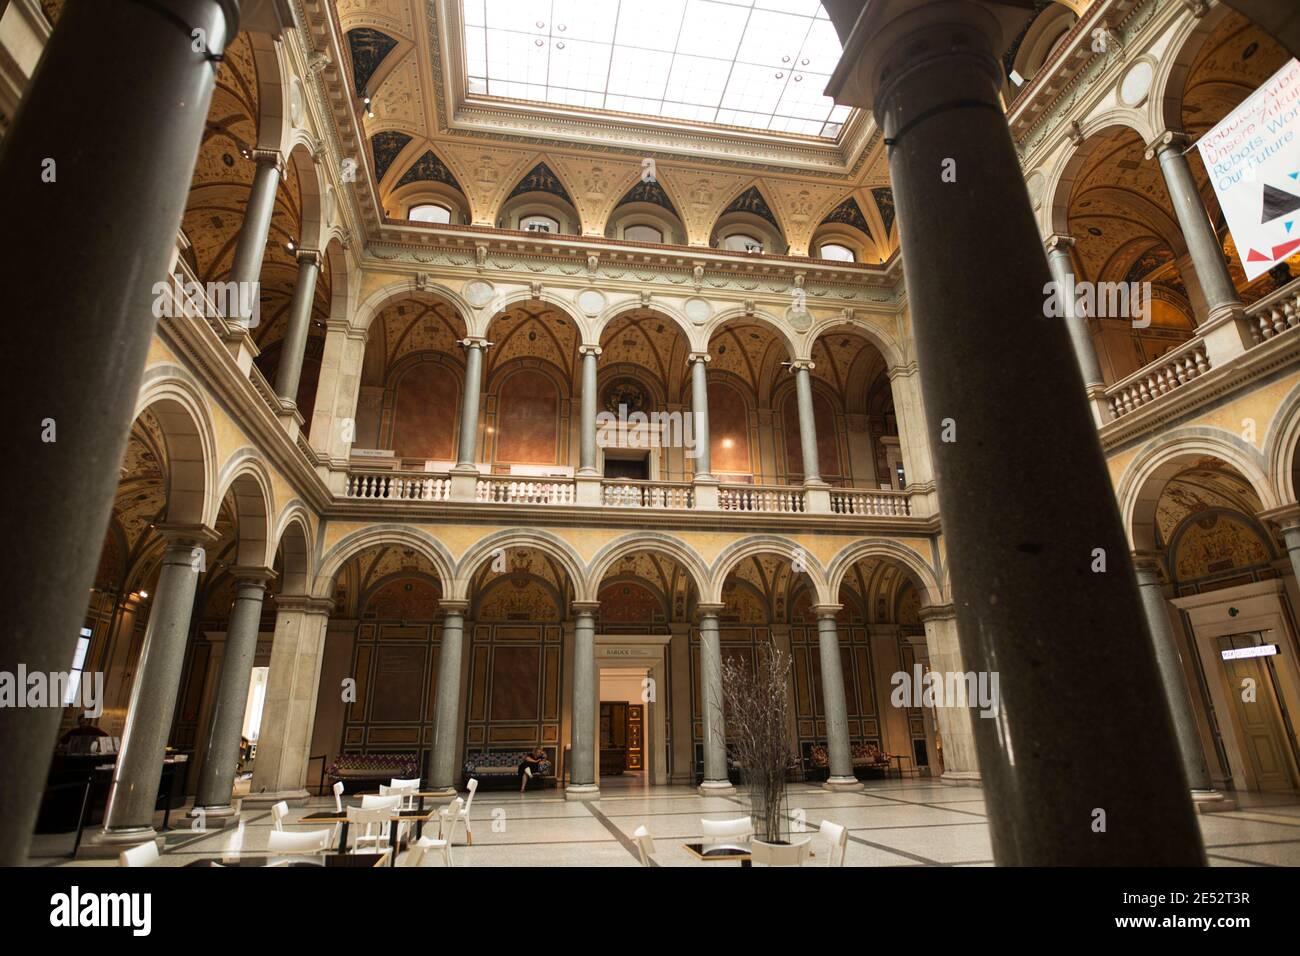 The interior courtyard of the Museum of Applied Arts (MAK) in Vienna, Austria. Stock Photo